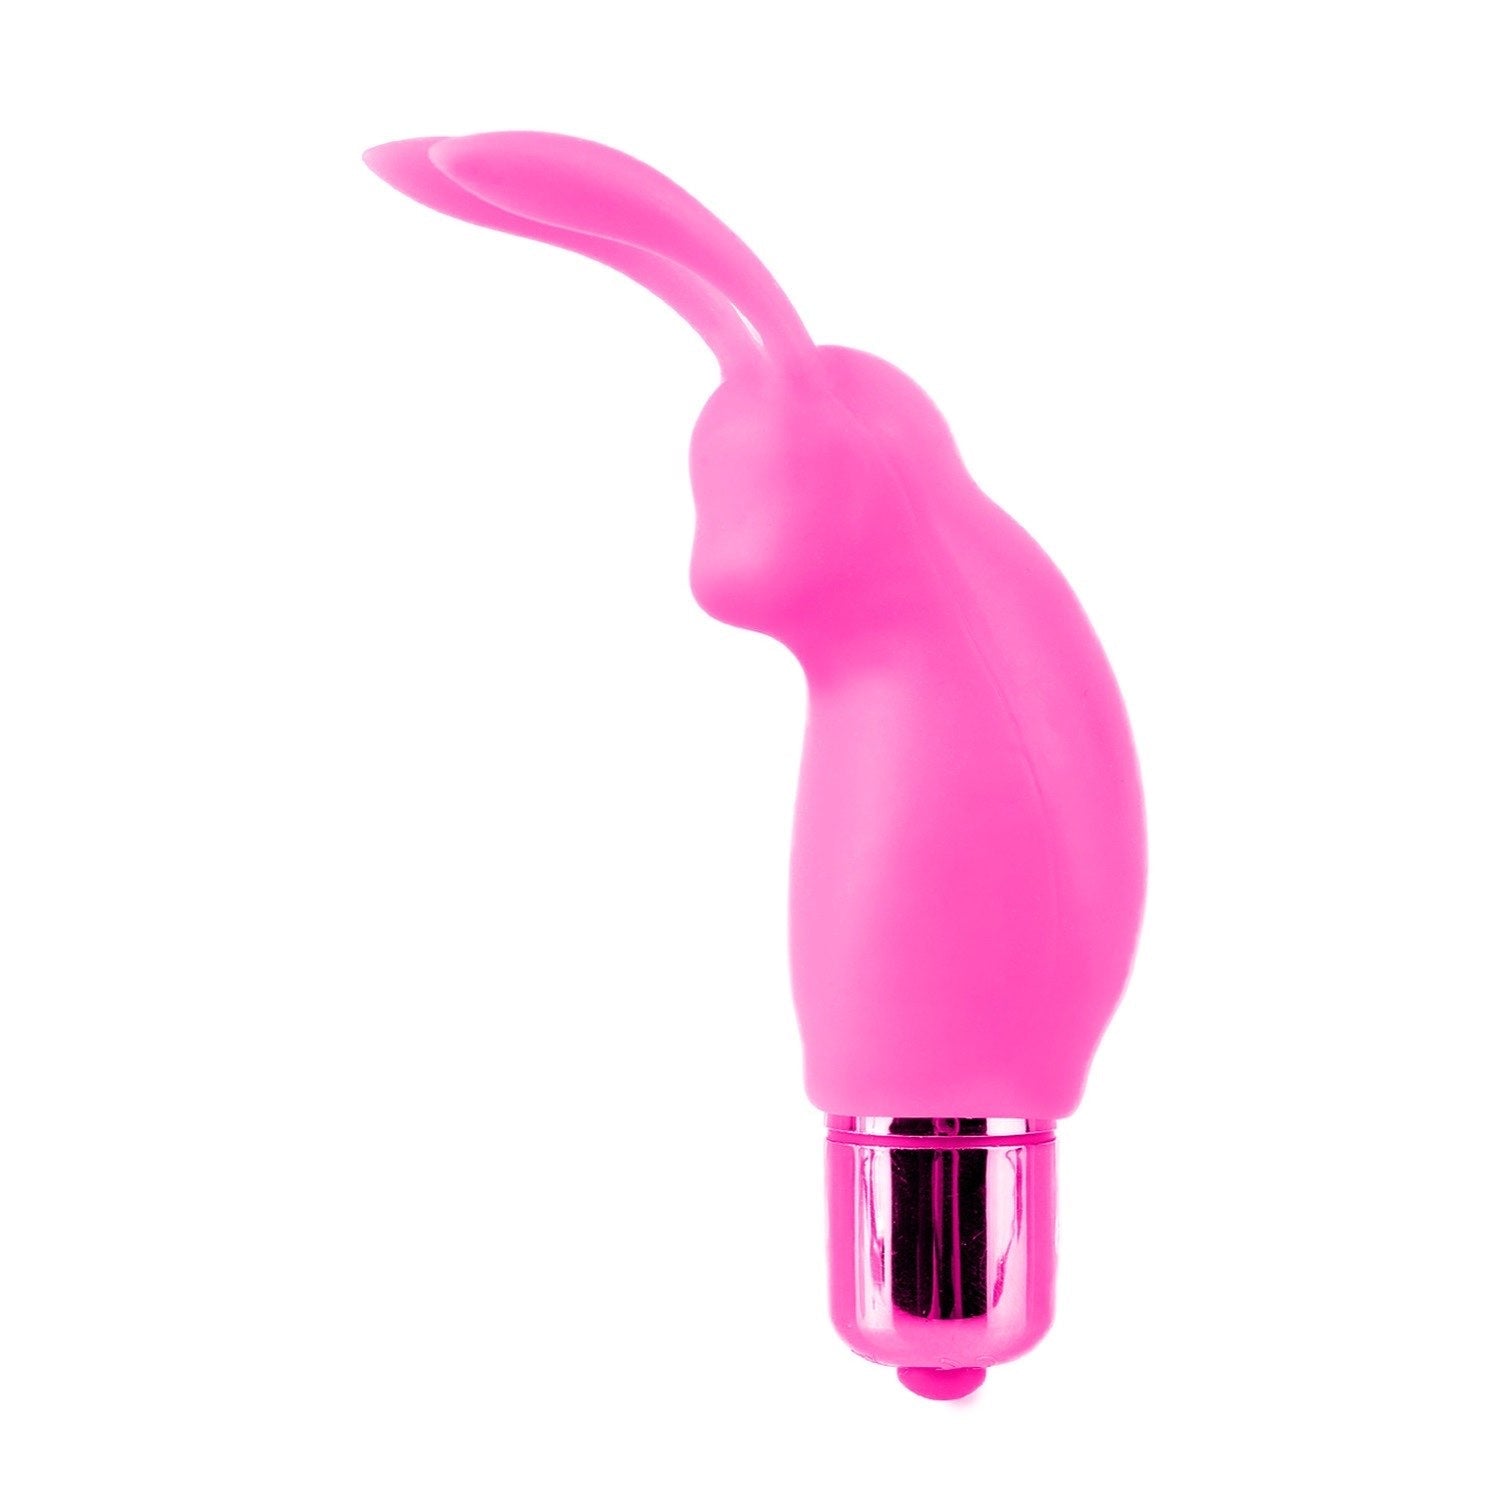  Neon Vibrating Couples Kit - Pink - 3 Piece Set by Pipedream